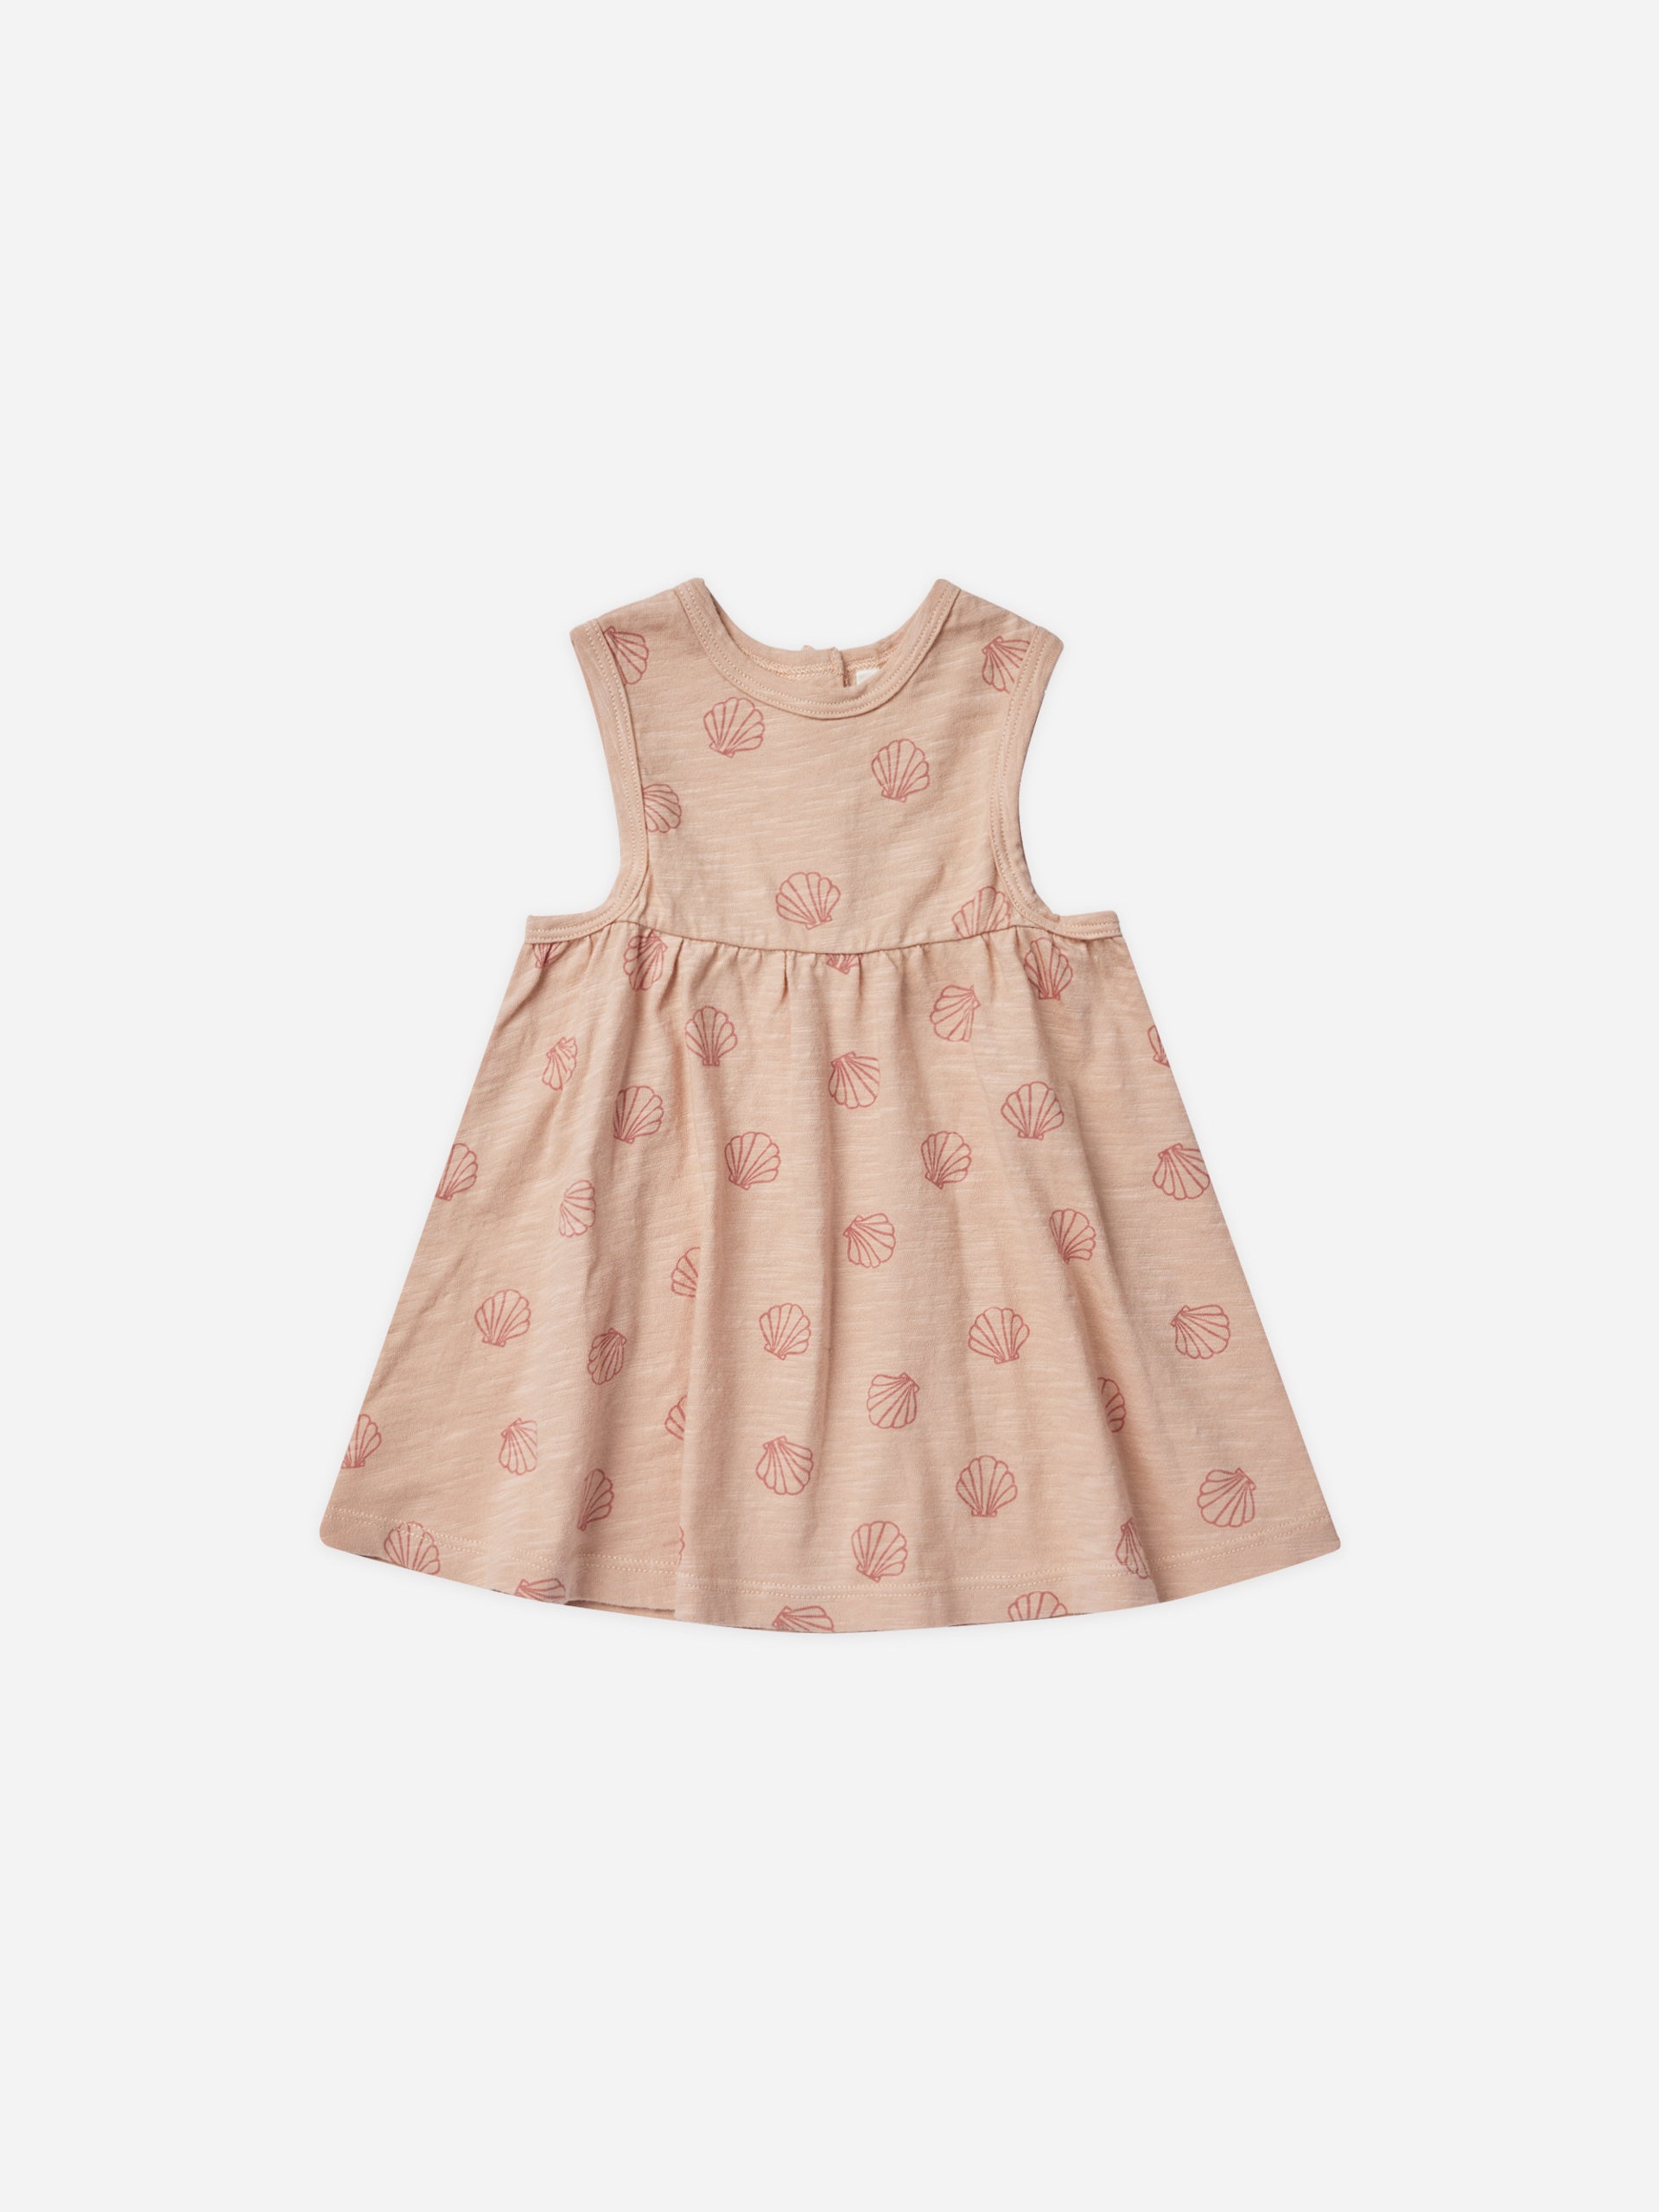 Layla Dress || Seashell - Rylee + Cru | Kids Clothes | Trendy Baby Clothes | Modern Infant Outfits |